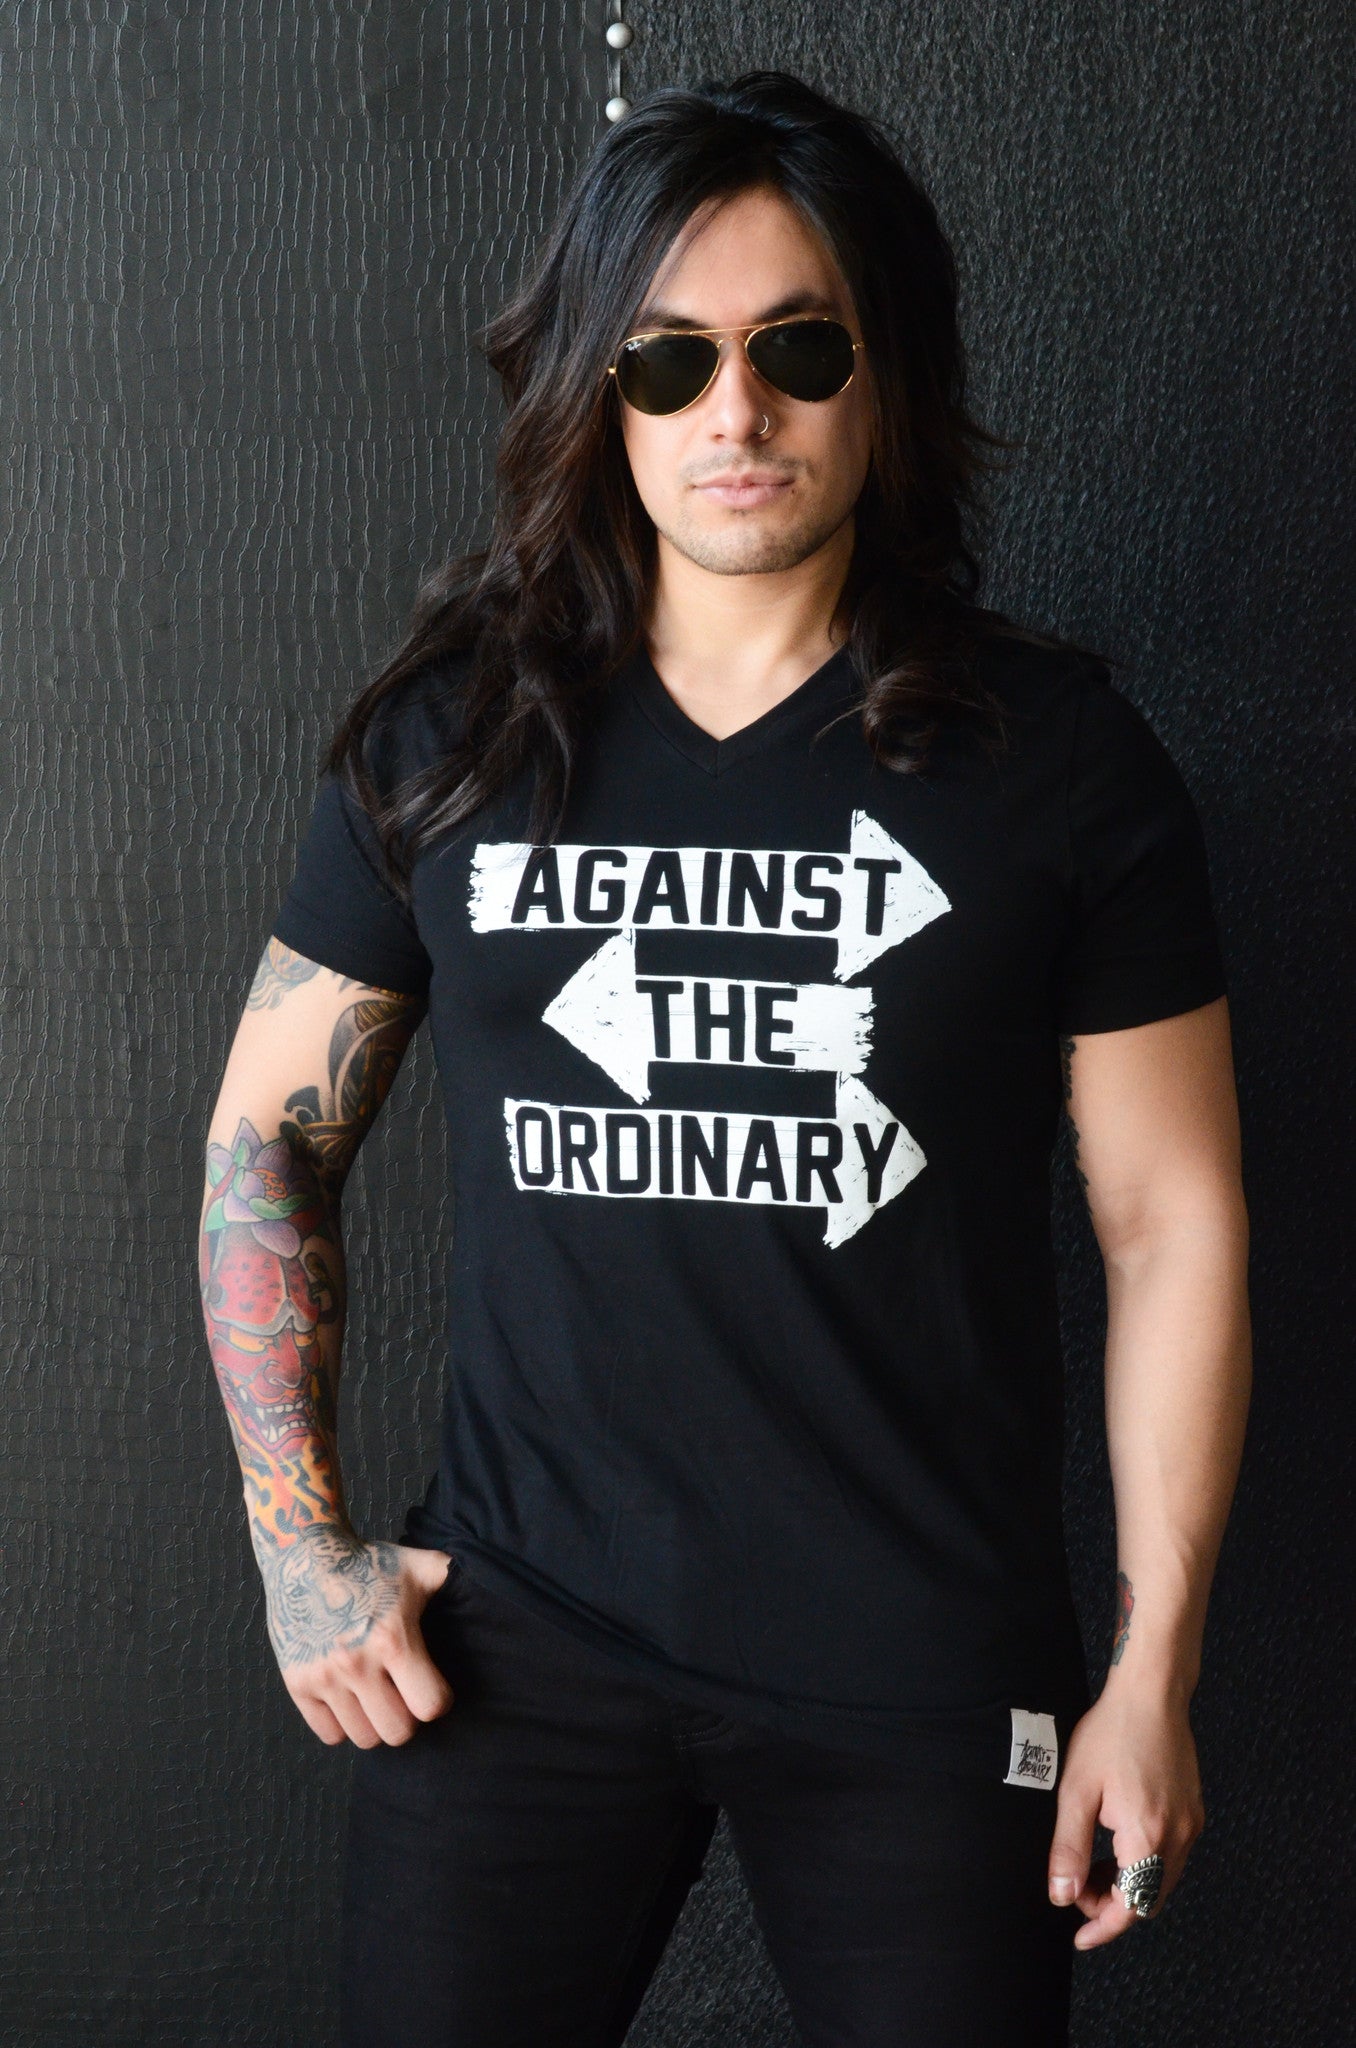 AGAINST THE ORDINARY Men's Short Sleeved V Neck Tee with ARROW Graphic